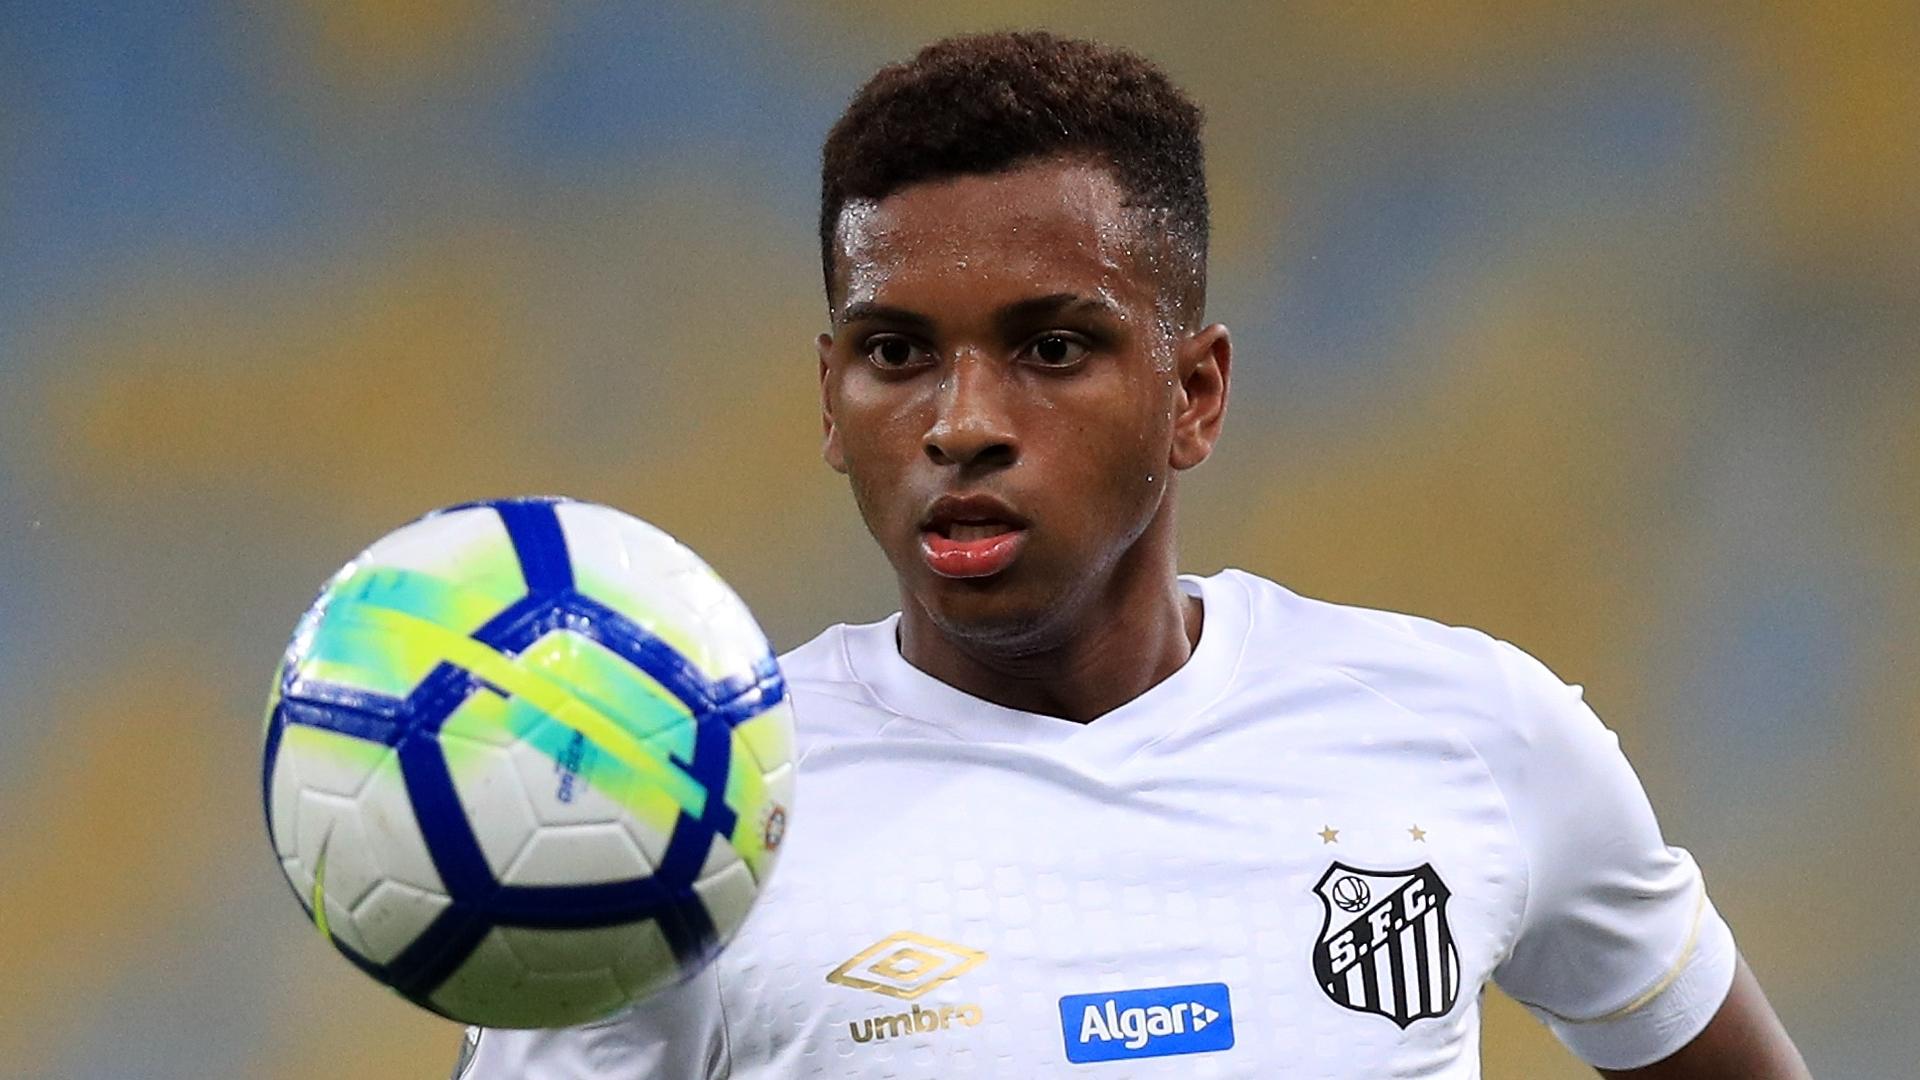 Real Madrid: New signing Rodrygo Goes is 'one of the great prodigies